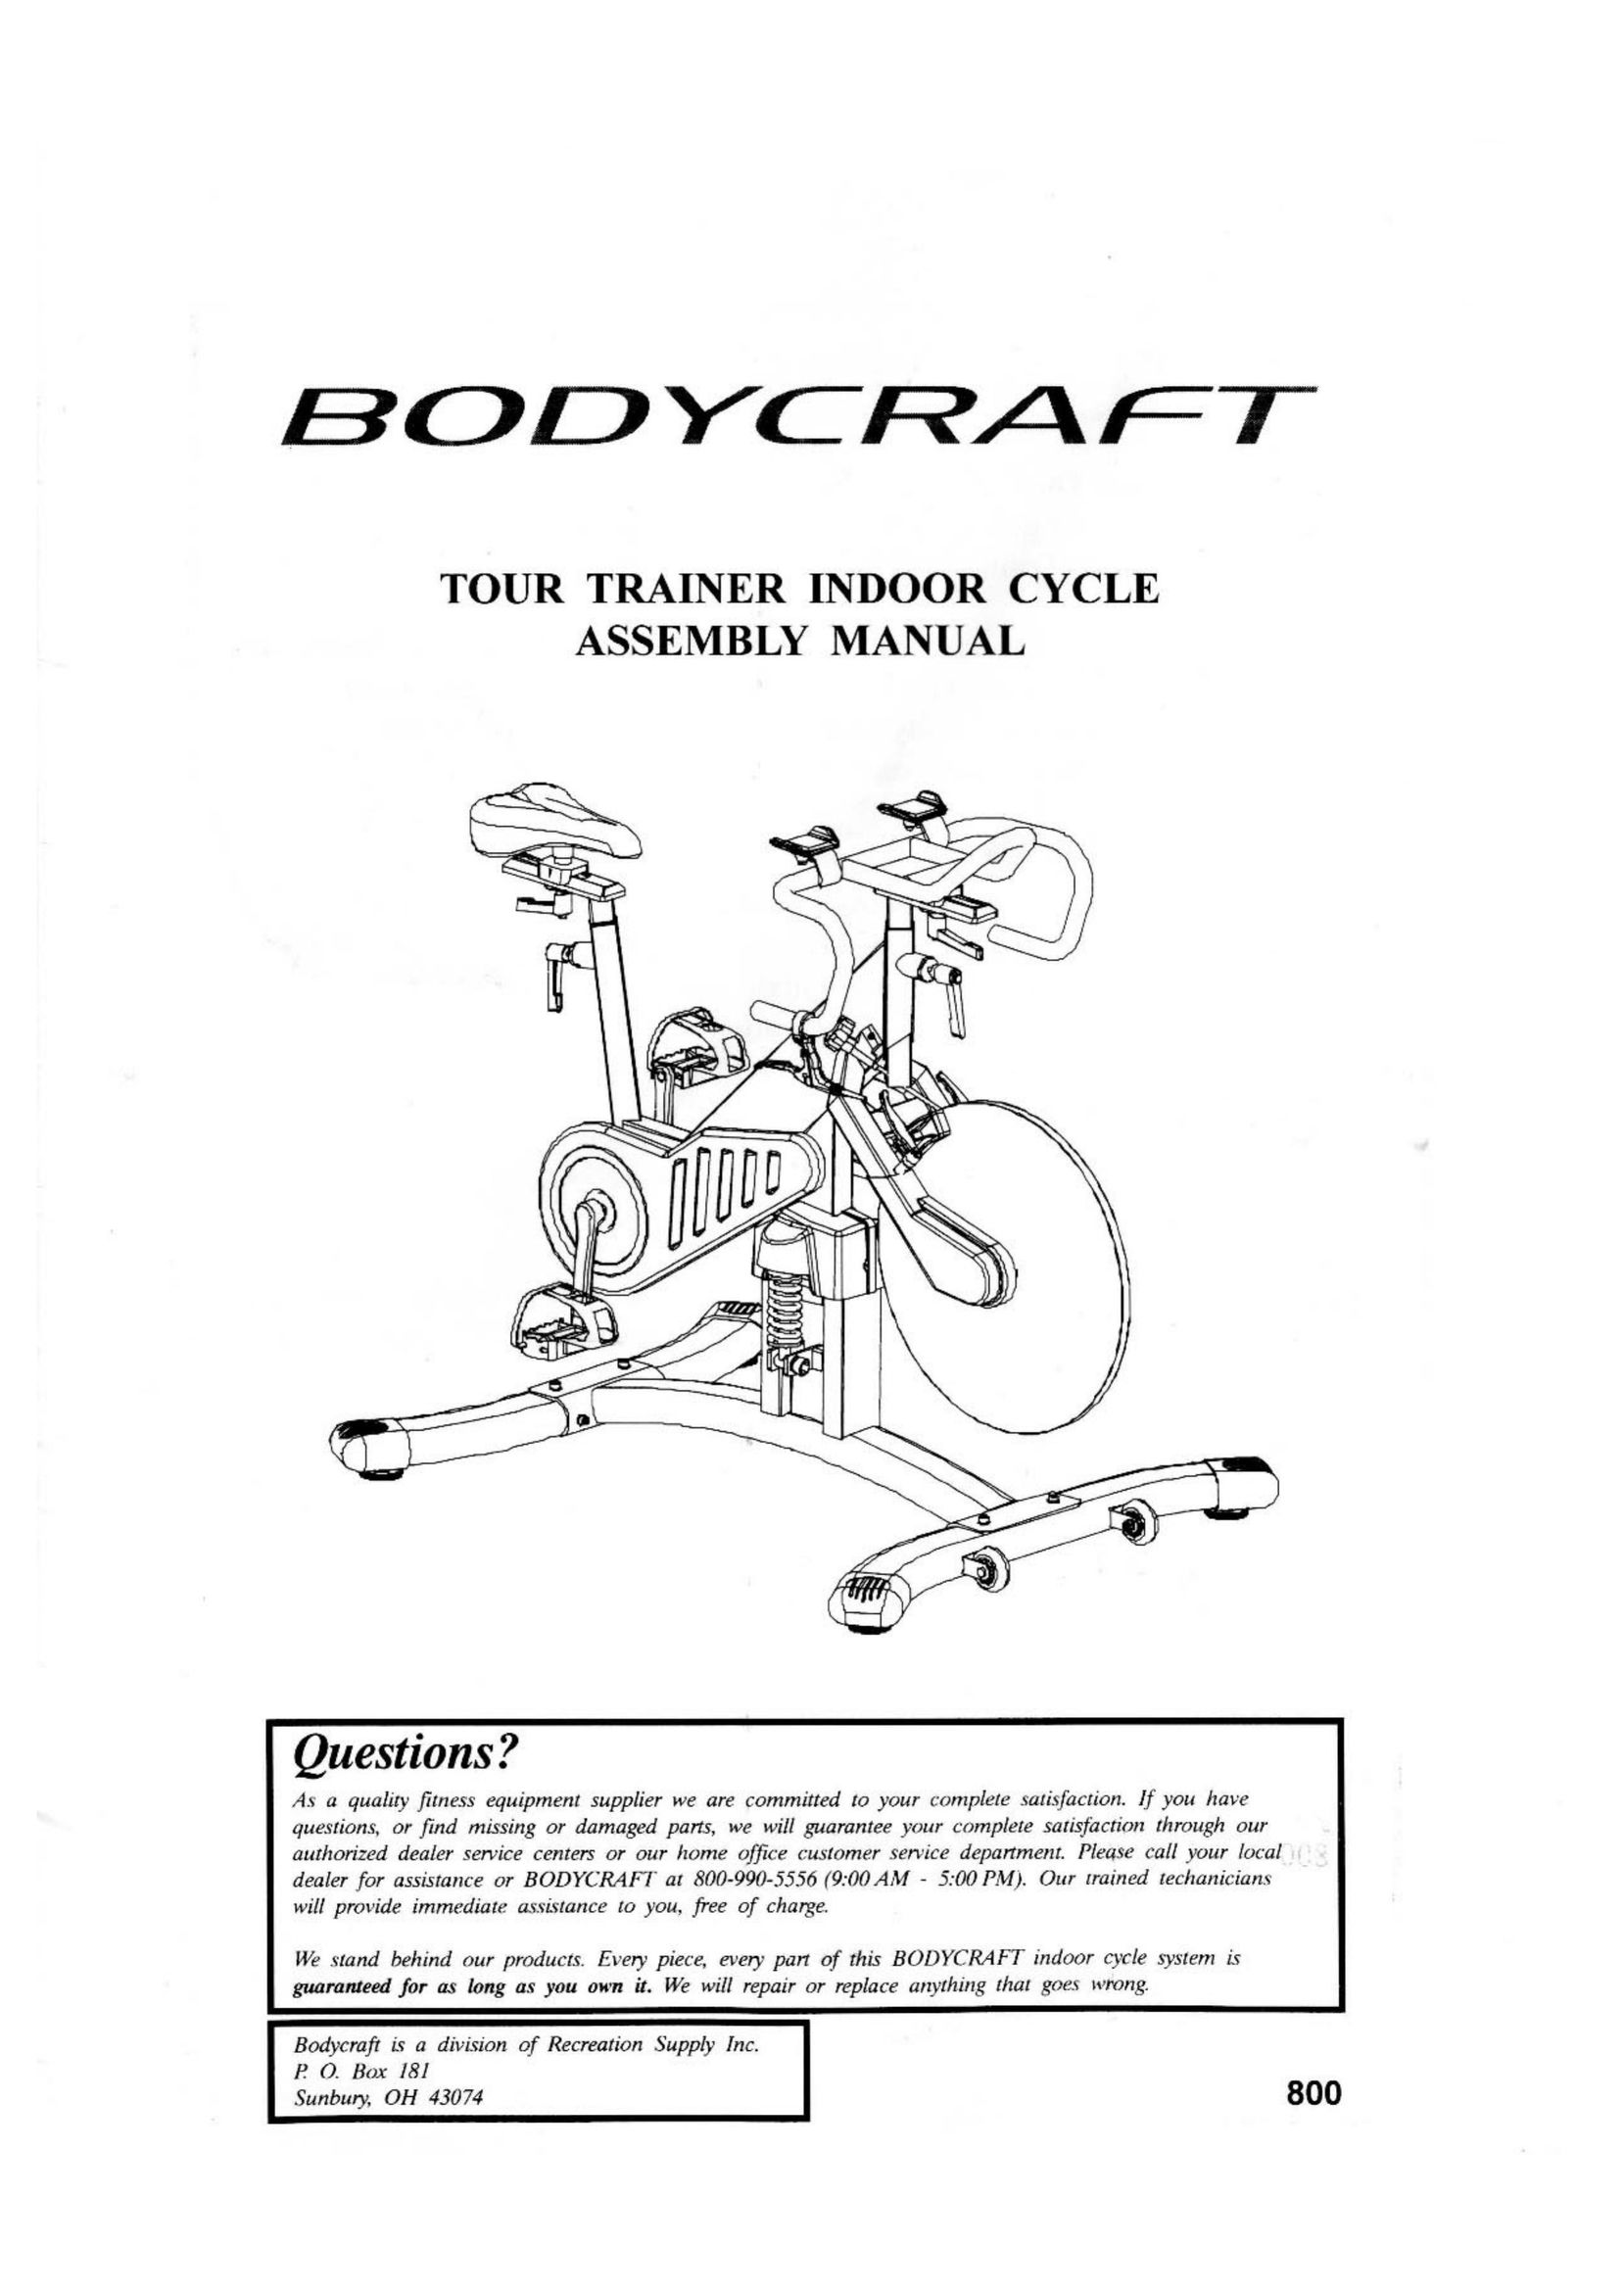 BodyCraft Tour Trainer Indoor Cycle Bicycle User Manual (Page 1)